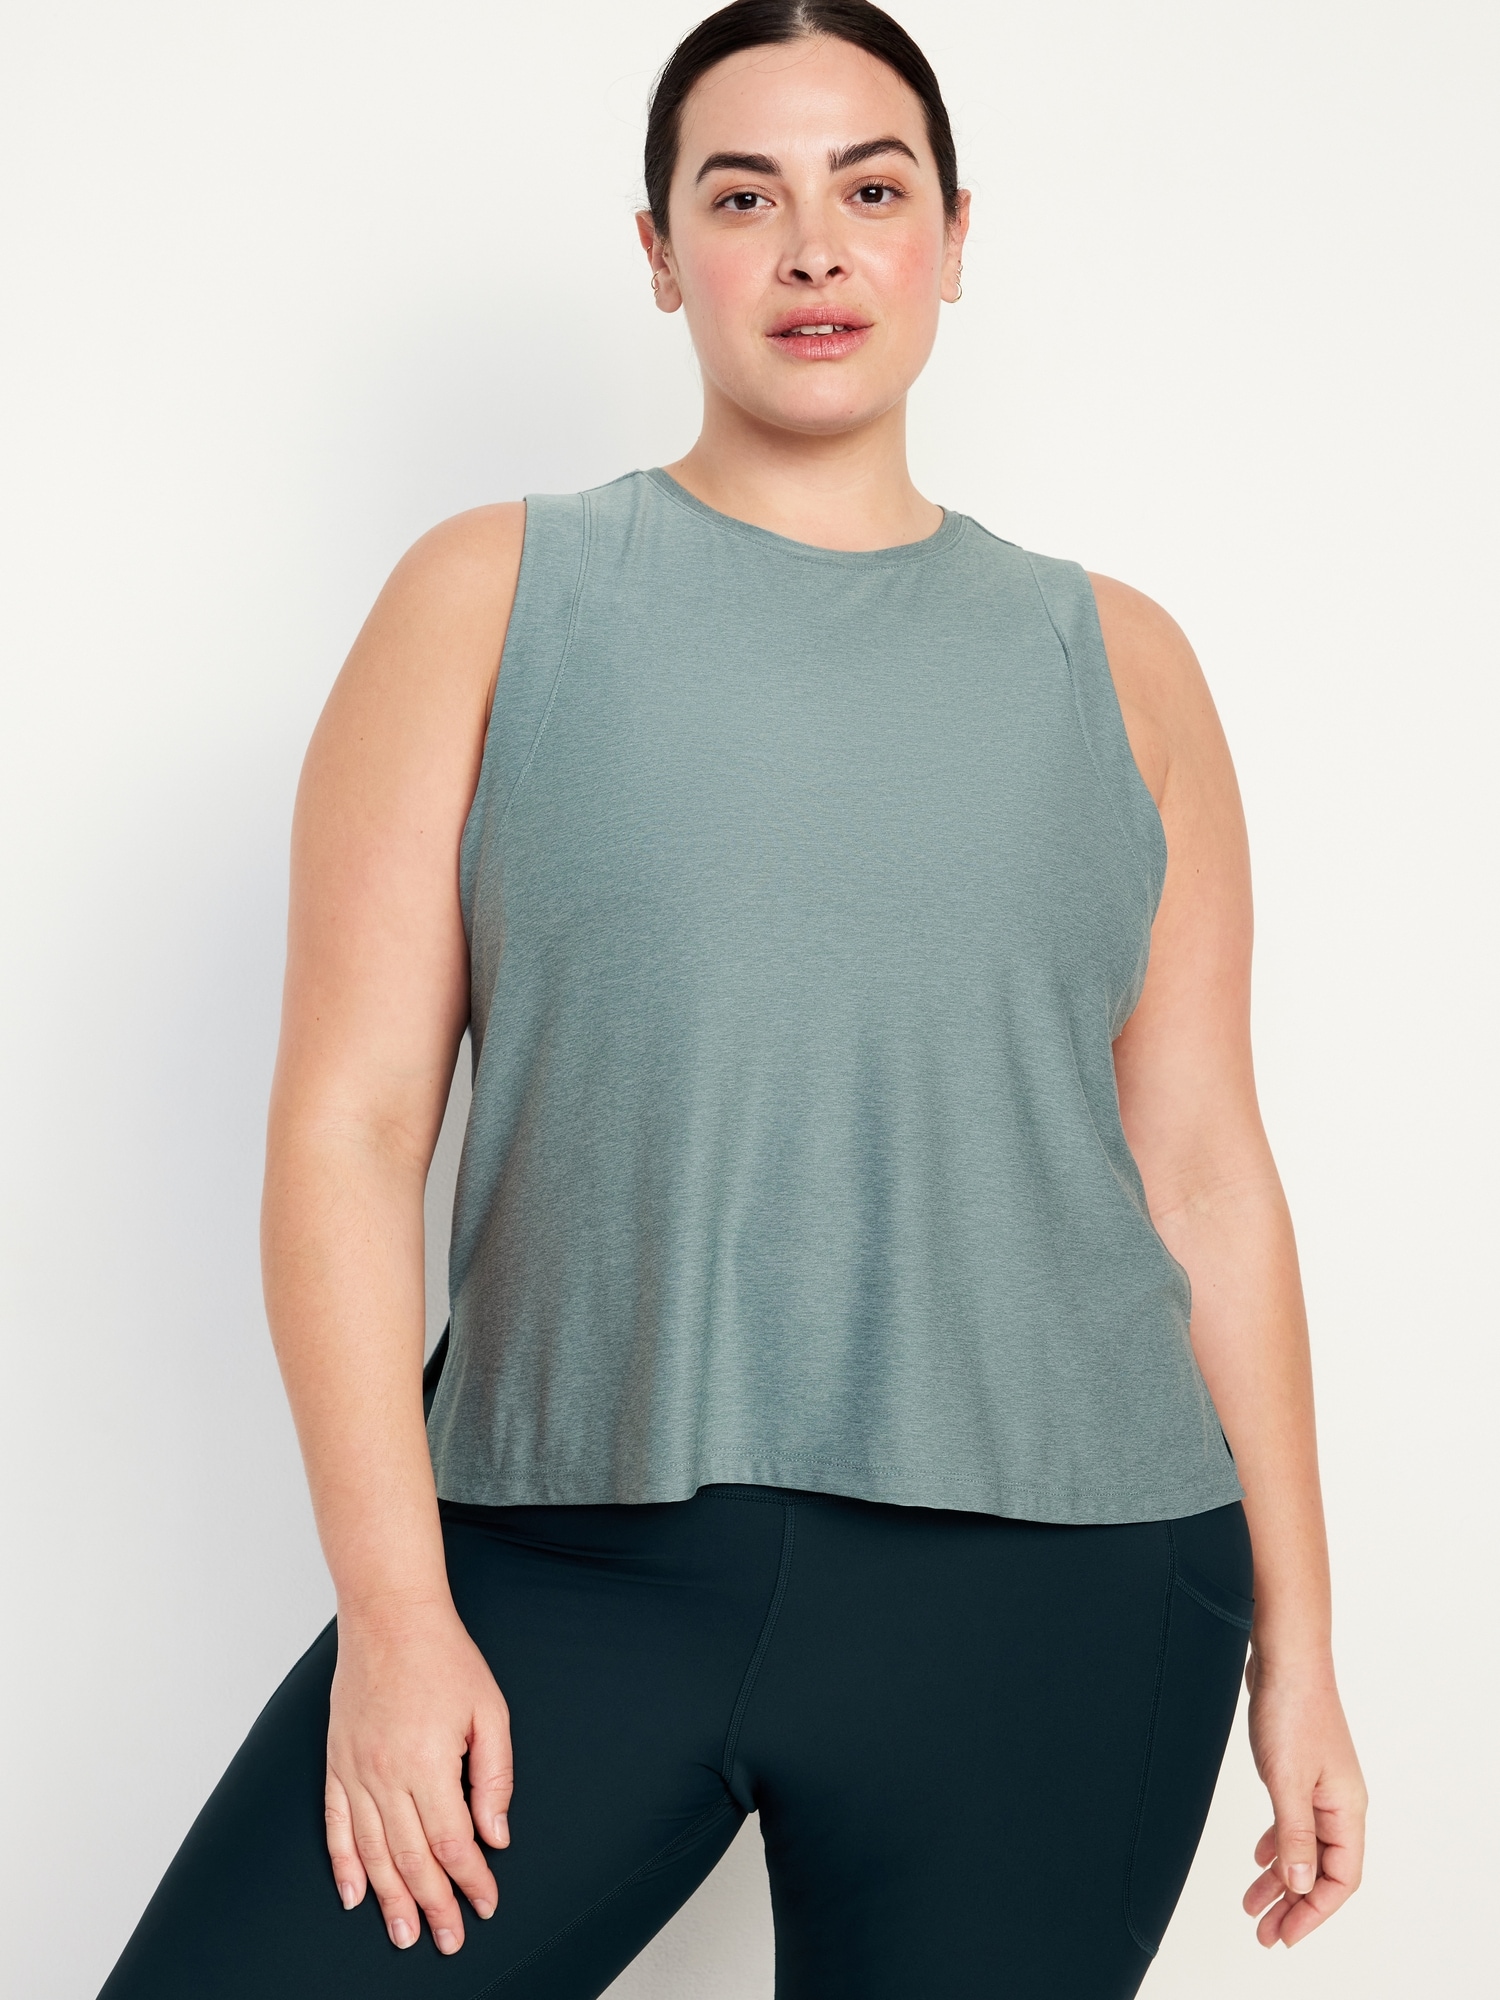 Cloud 94 Soft Tank Top | Old Navy